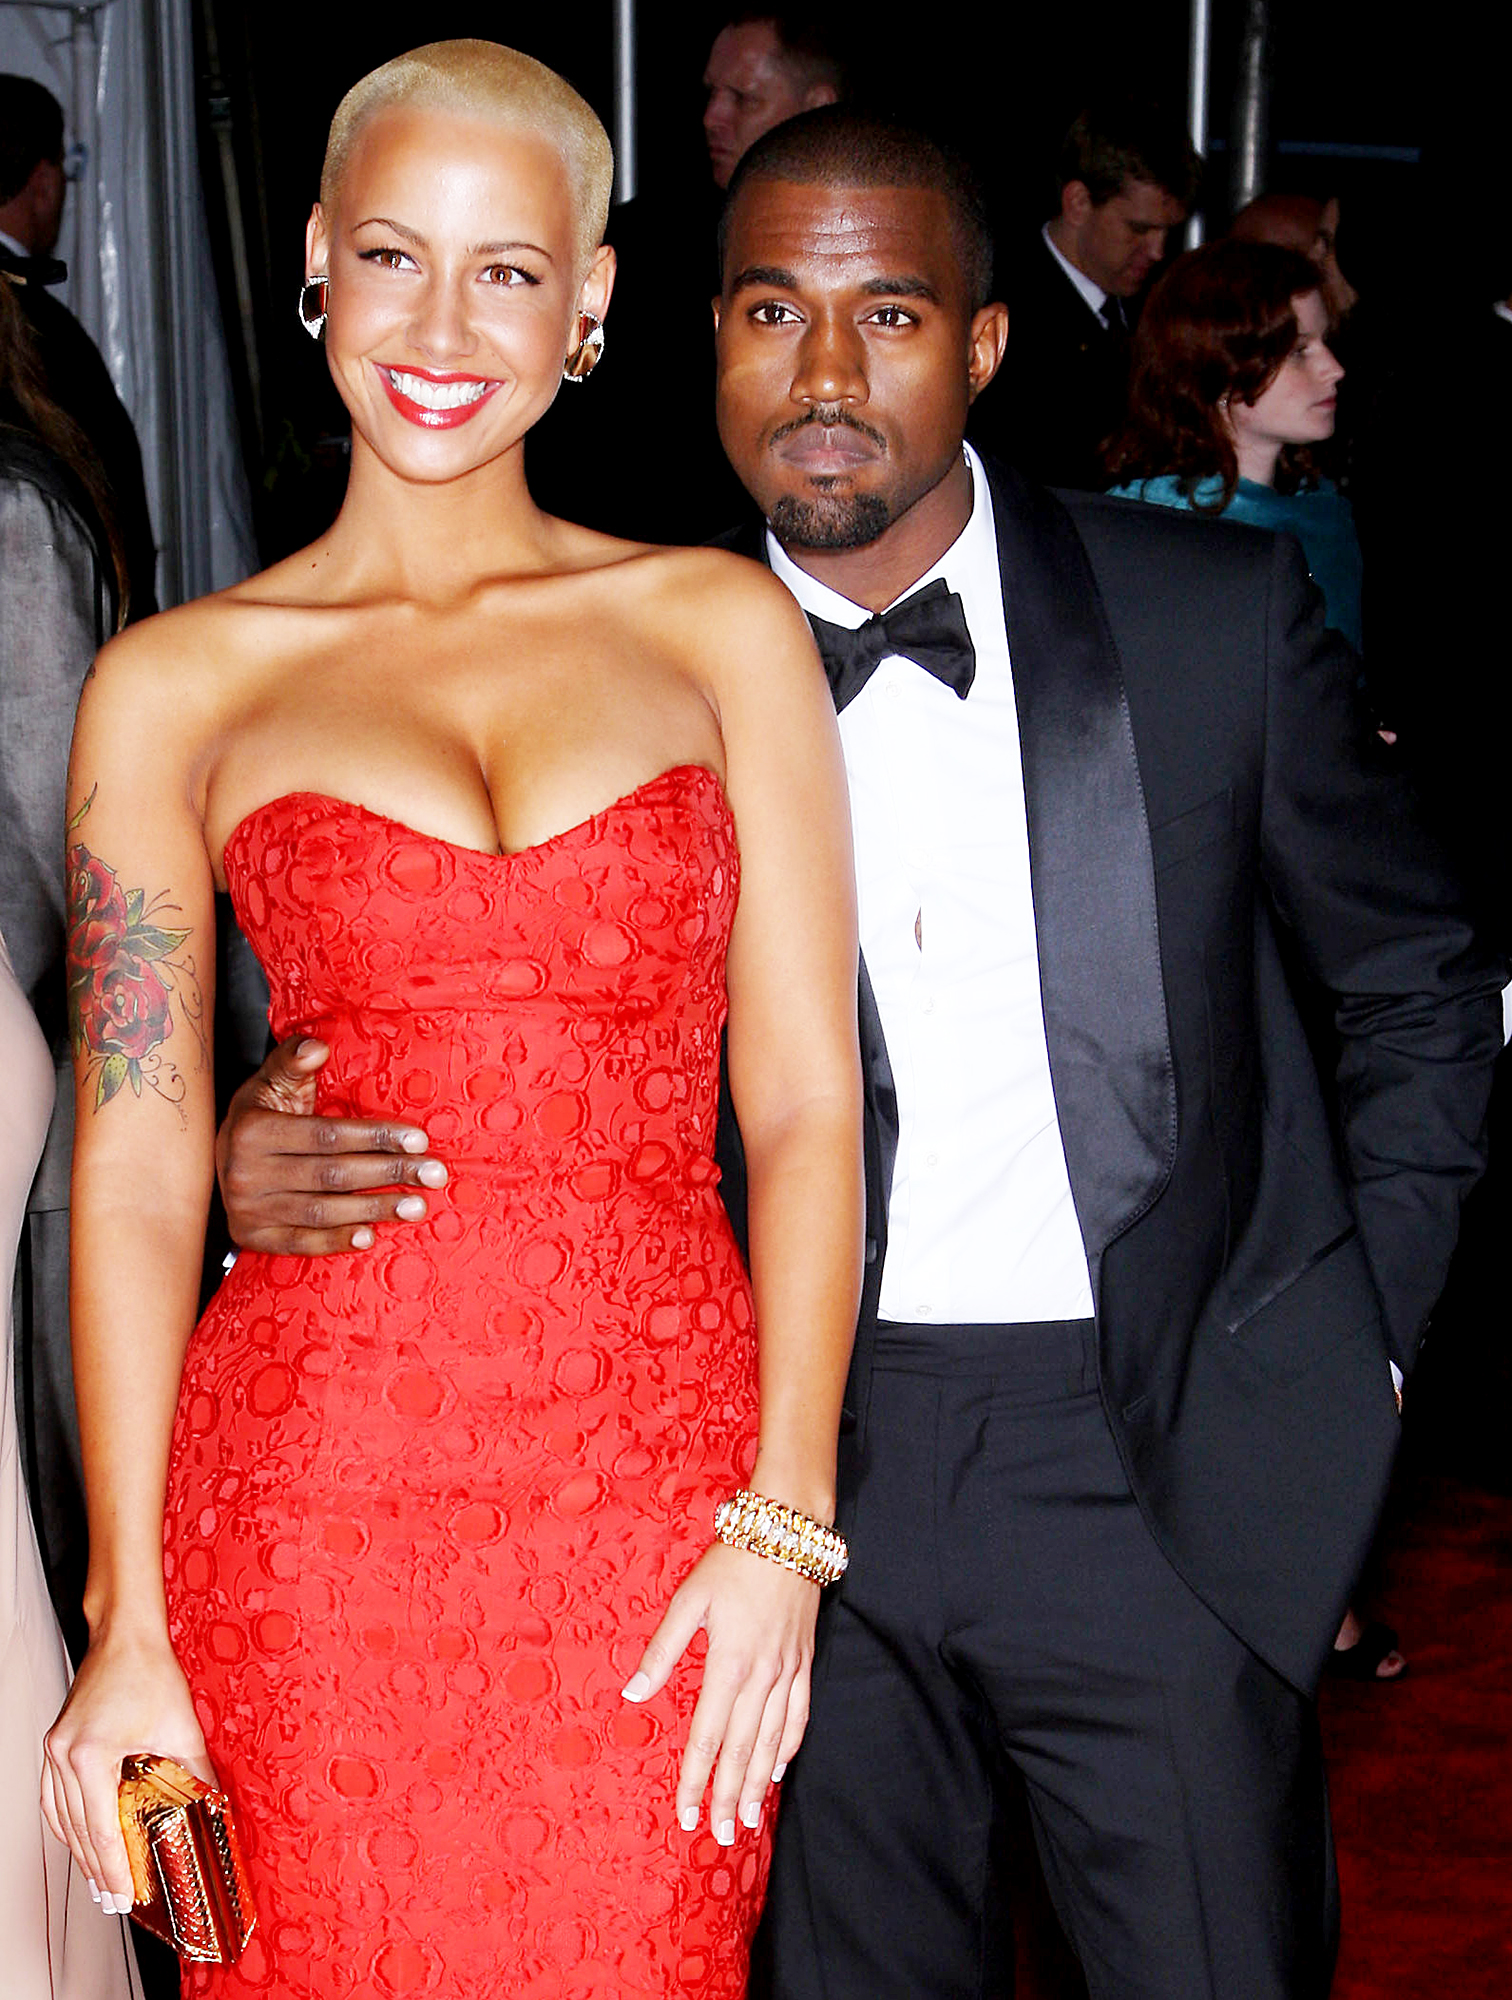 05-Amber-Rose-Kanye-West-Dating-History-Through-the-Years.jpg